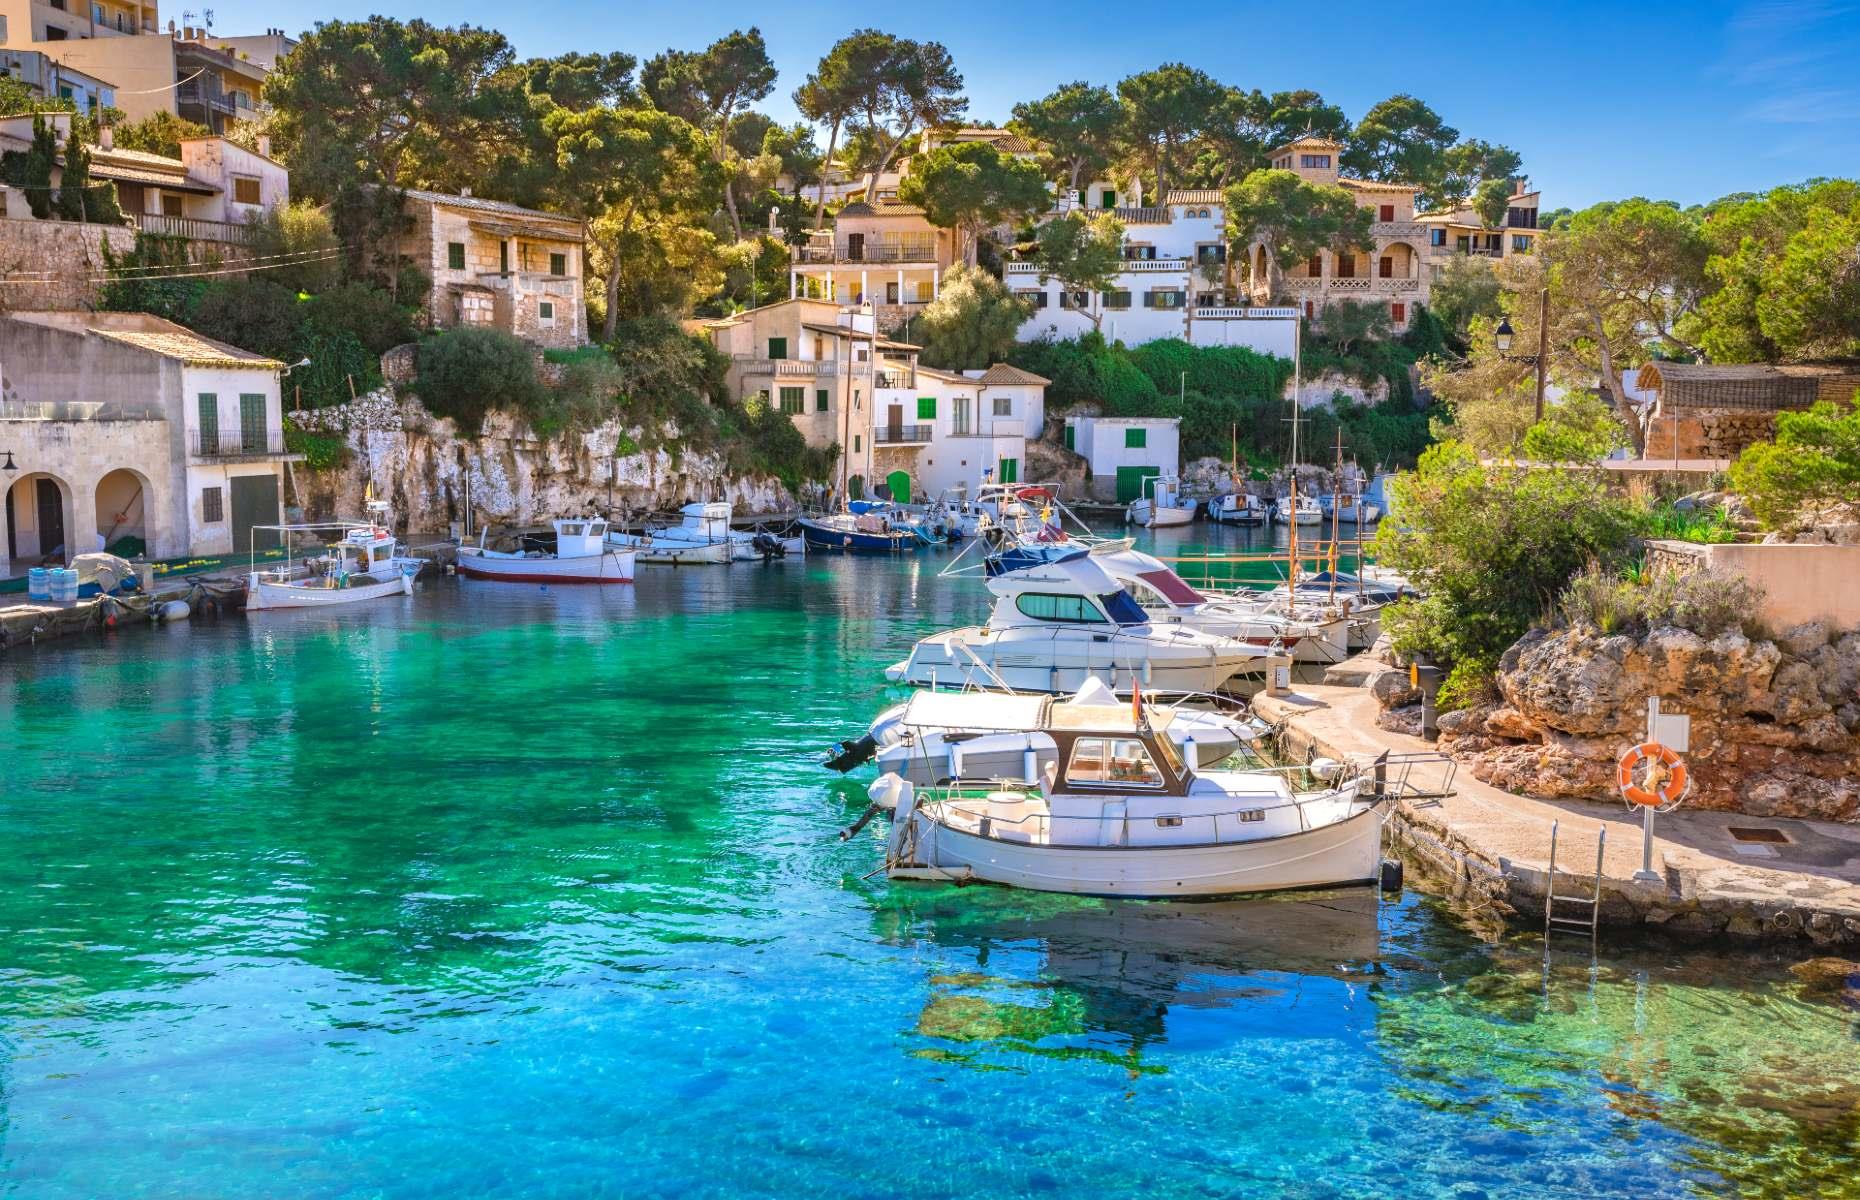 <p>The Balearic island of Mallorca is a hotspot for tourists with many resorts and beaches that become packed in warm weather. In a bid to tackle overcrowding, the Mallorca Council has outlined a new plan, with steps including reducing the number of hotel beds to 430,000 across the entire island, as well as increasing inspections to tackle illegal vacation lets. It’s hoped that the measures will shift the focus from quantity to quality when it comes to tourism.</p>